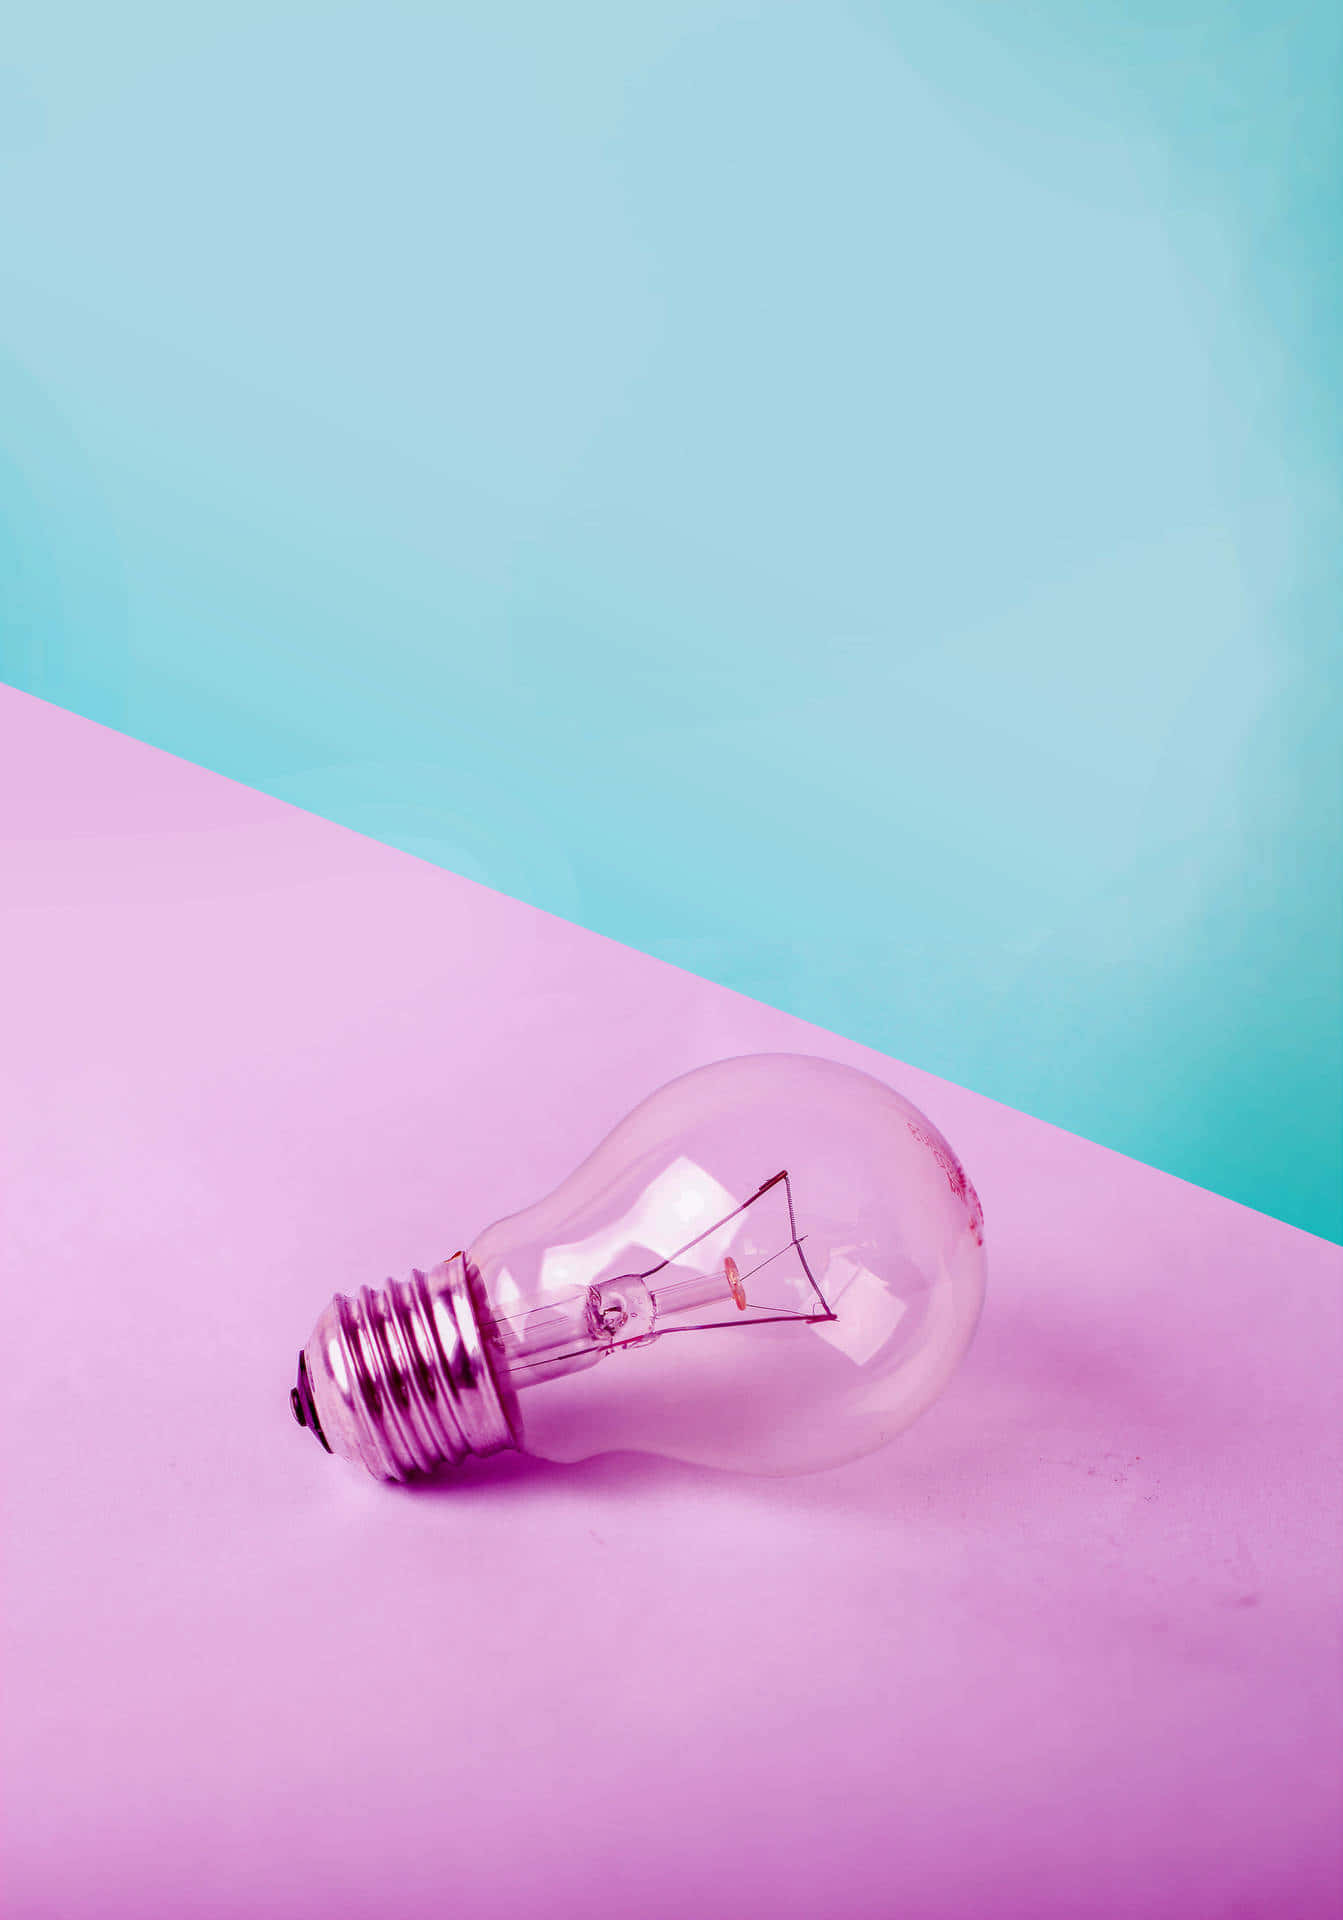 A Light Bulb On A Pink And Purple Background